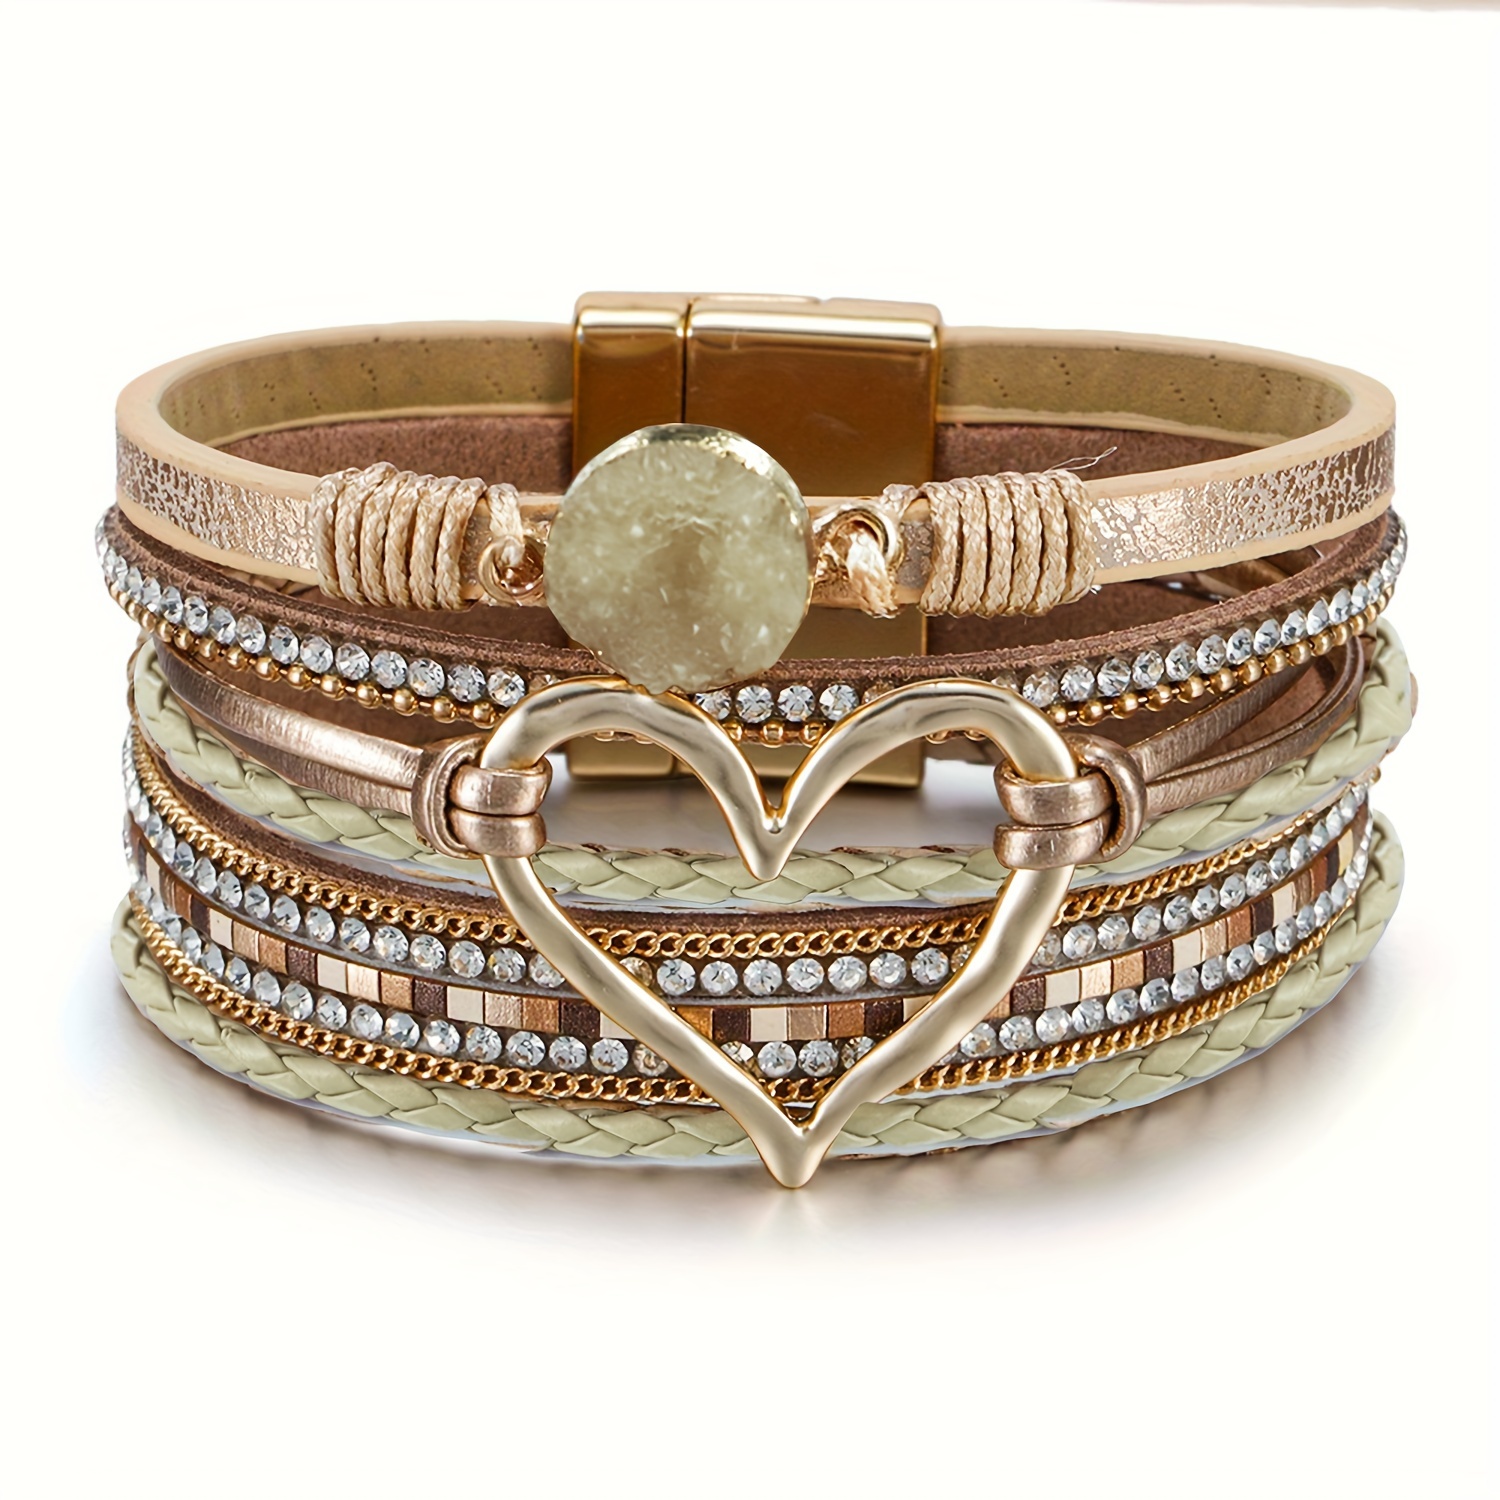 Bracelet for Women Wrap Multi-Layer Leather Bracelet Magnetic Clasp Cuff  Bangle Jewelry 